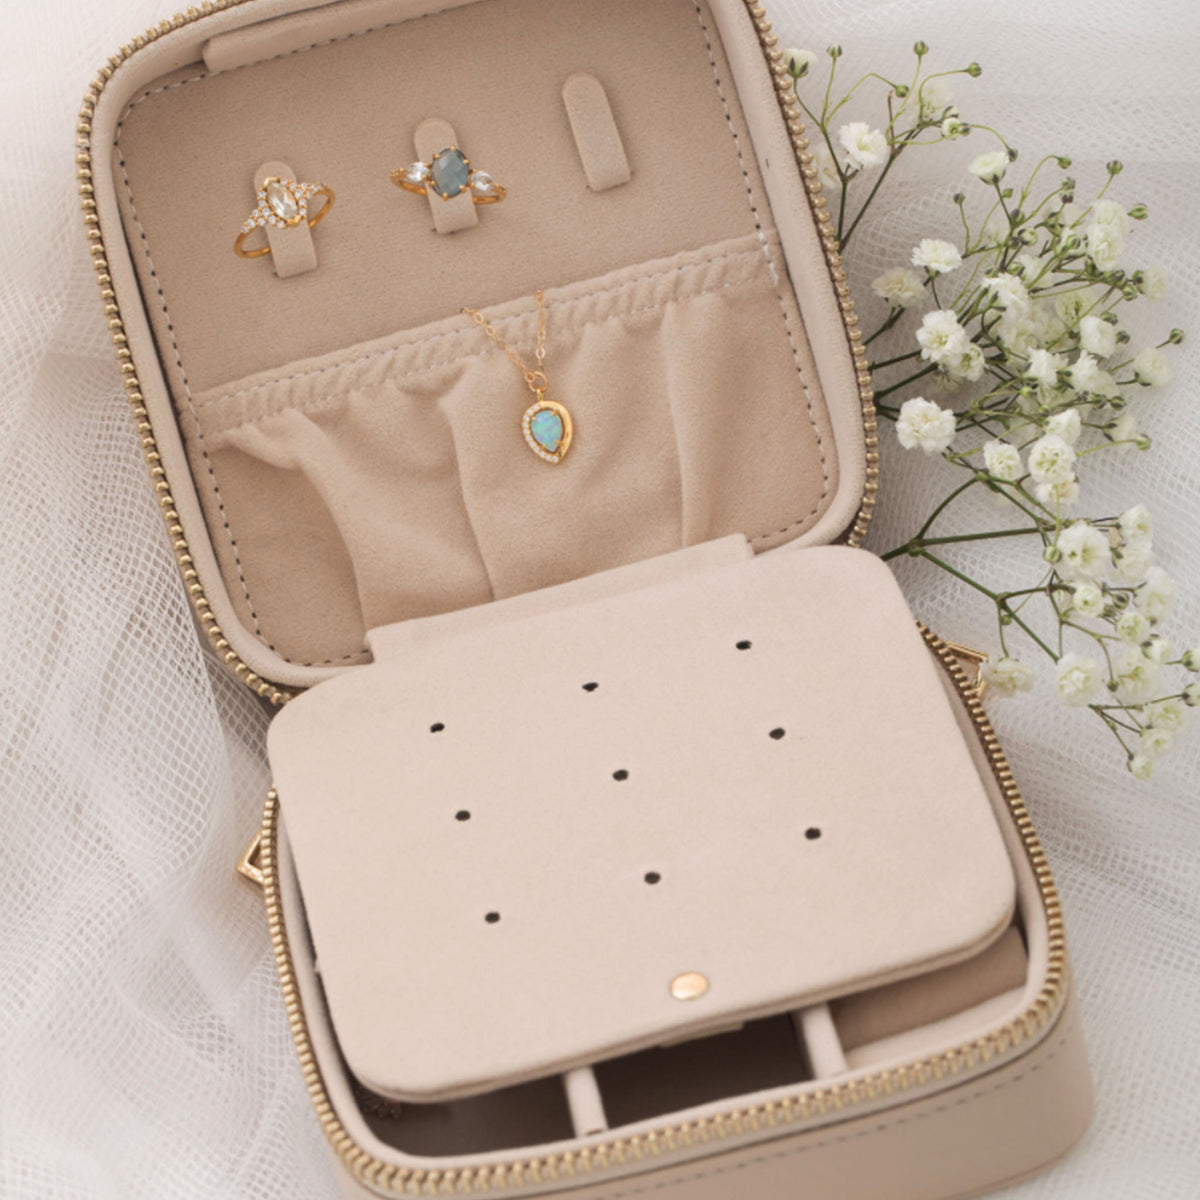 Surprise Jewelry Case (with 3 FREE pieces of jewelry)